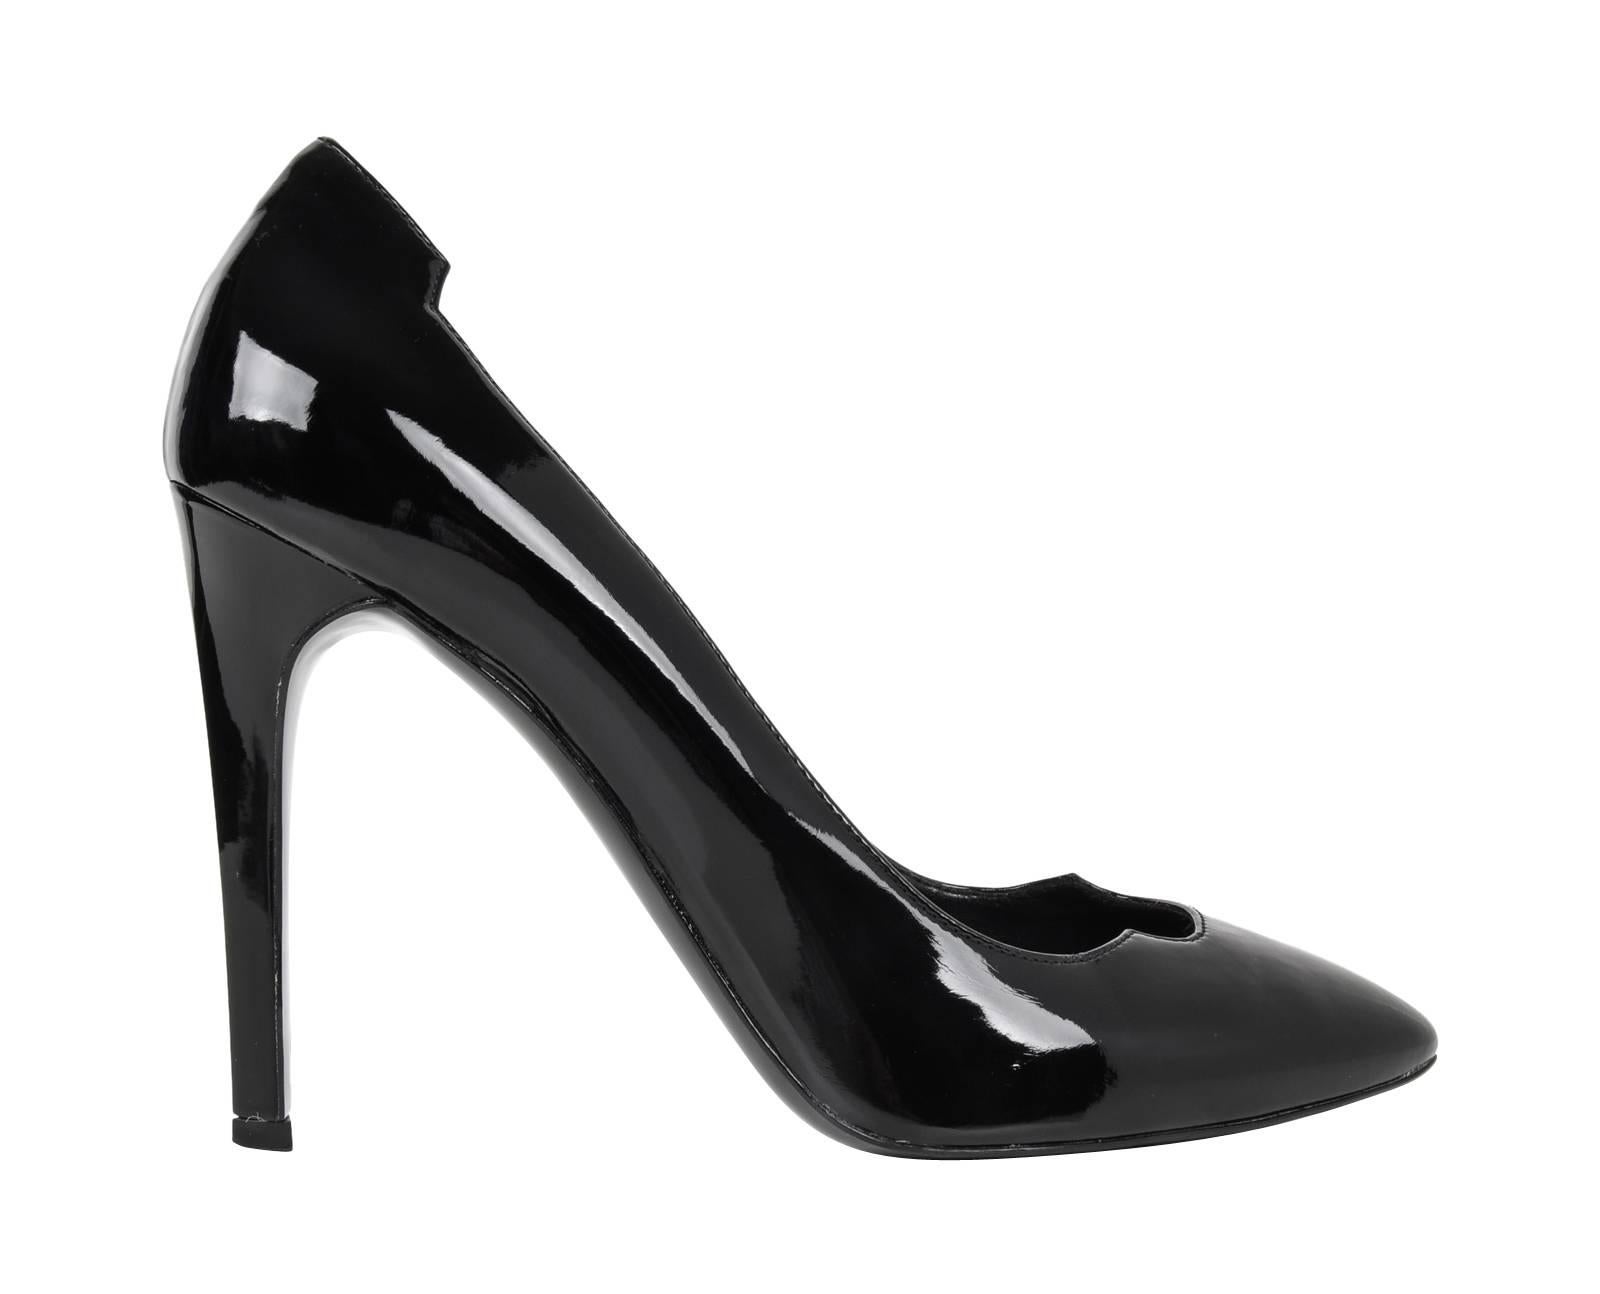 Guaranteed  authentic Stella McCartney jet black Morgana patent leather pump. 
Architectural shapes at top of foot and heel.
Softly rounded toe.
Shaped slim heel.
Perfect transition from to evening shoe. 
NEW or NEVER WORN
final sale
     
SIZE